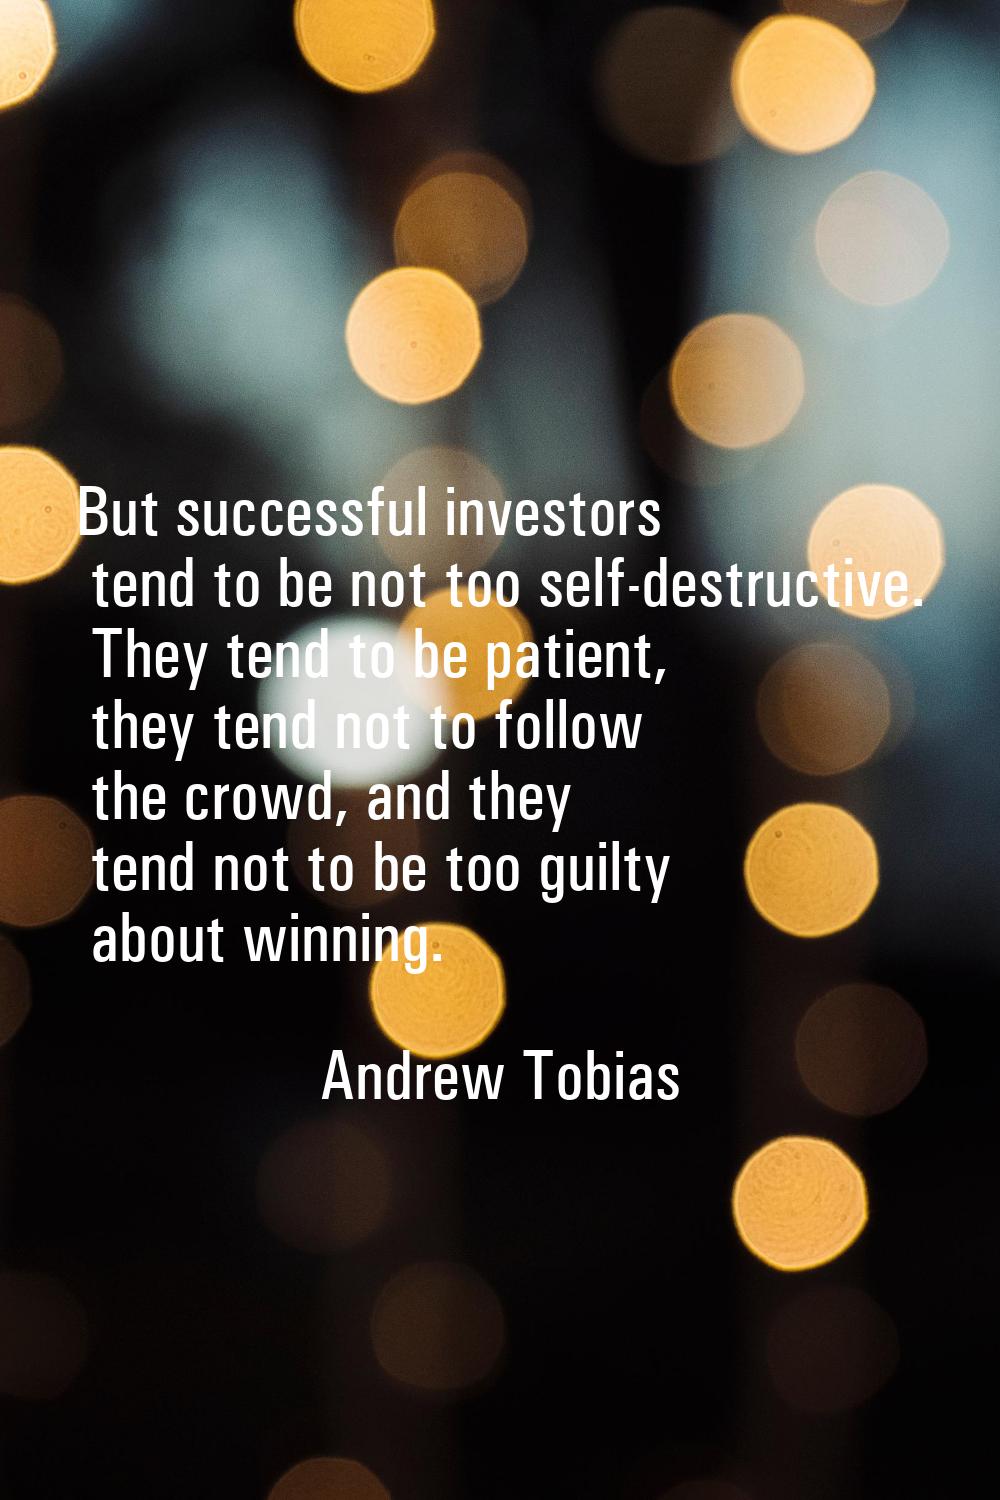 But successful investors tend to be not too self-destructive. They tend to be patient, they tend no